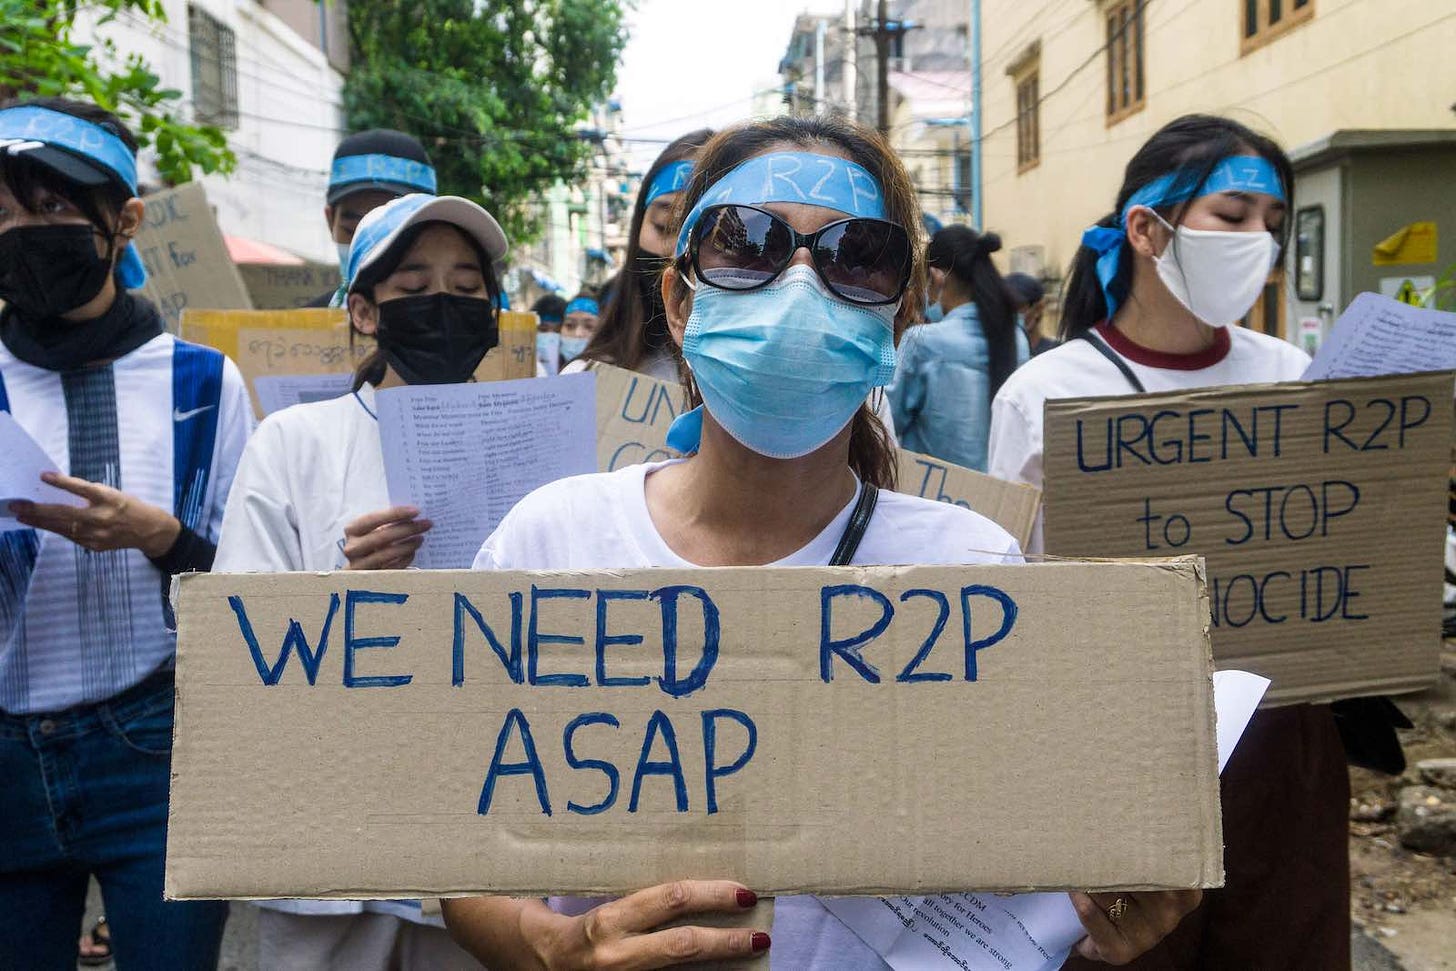 R2P: An idea whose time never comes | Lowy Institute